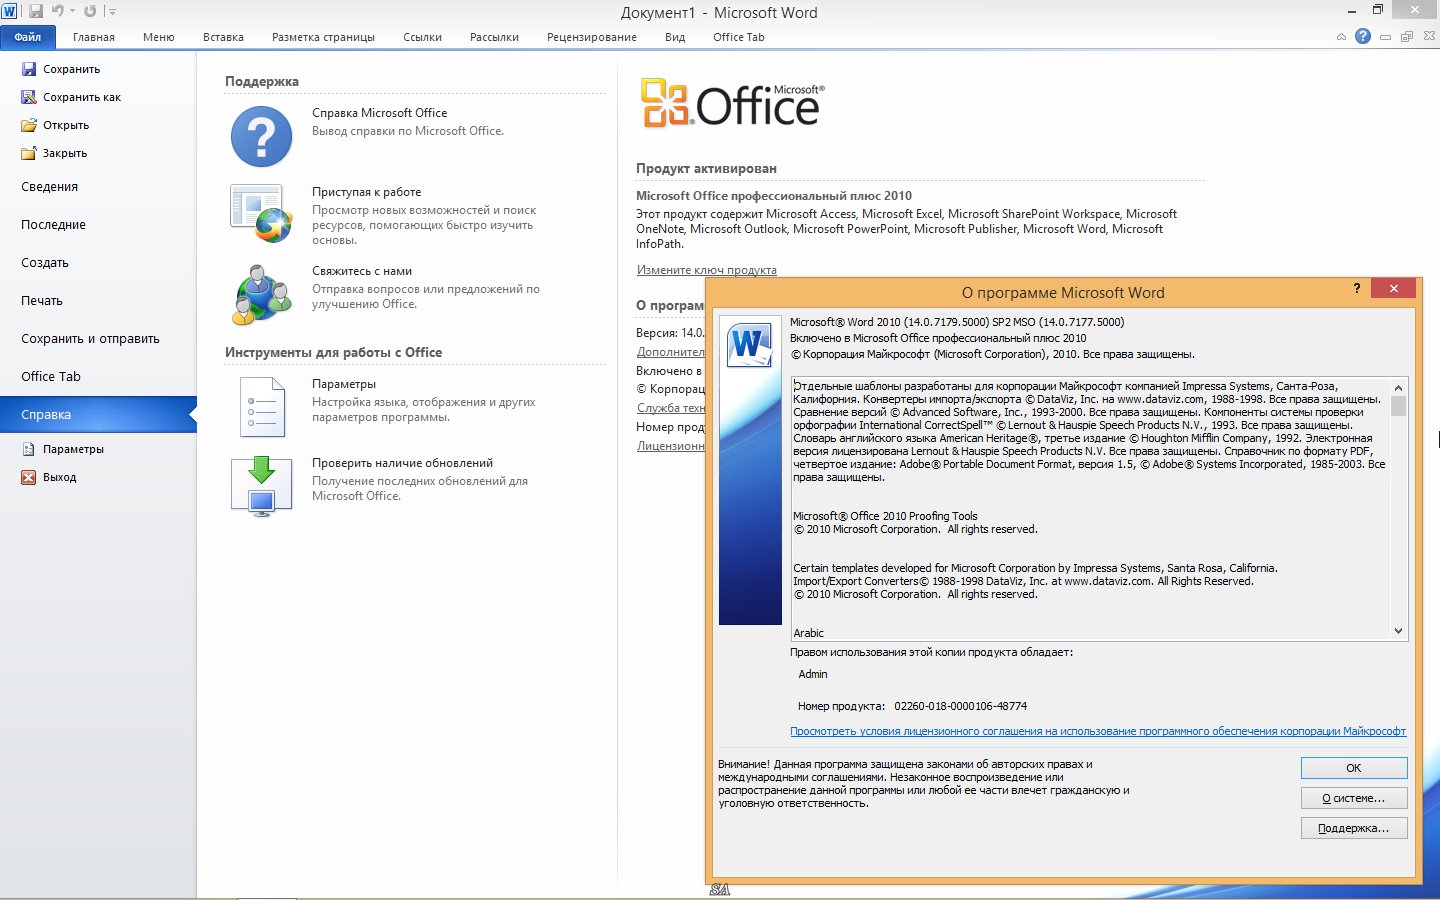 Ms office visio professional 2007.iso